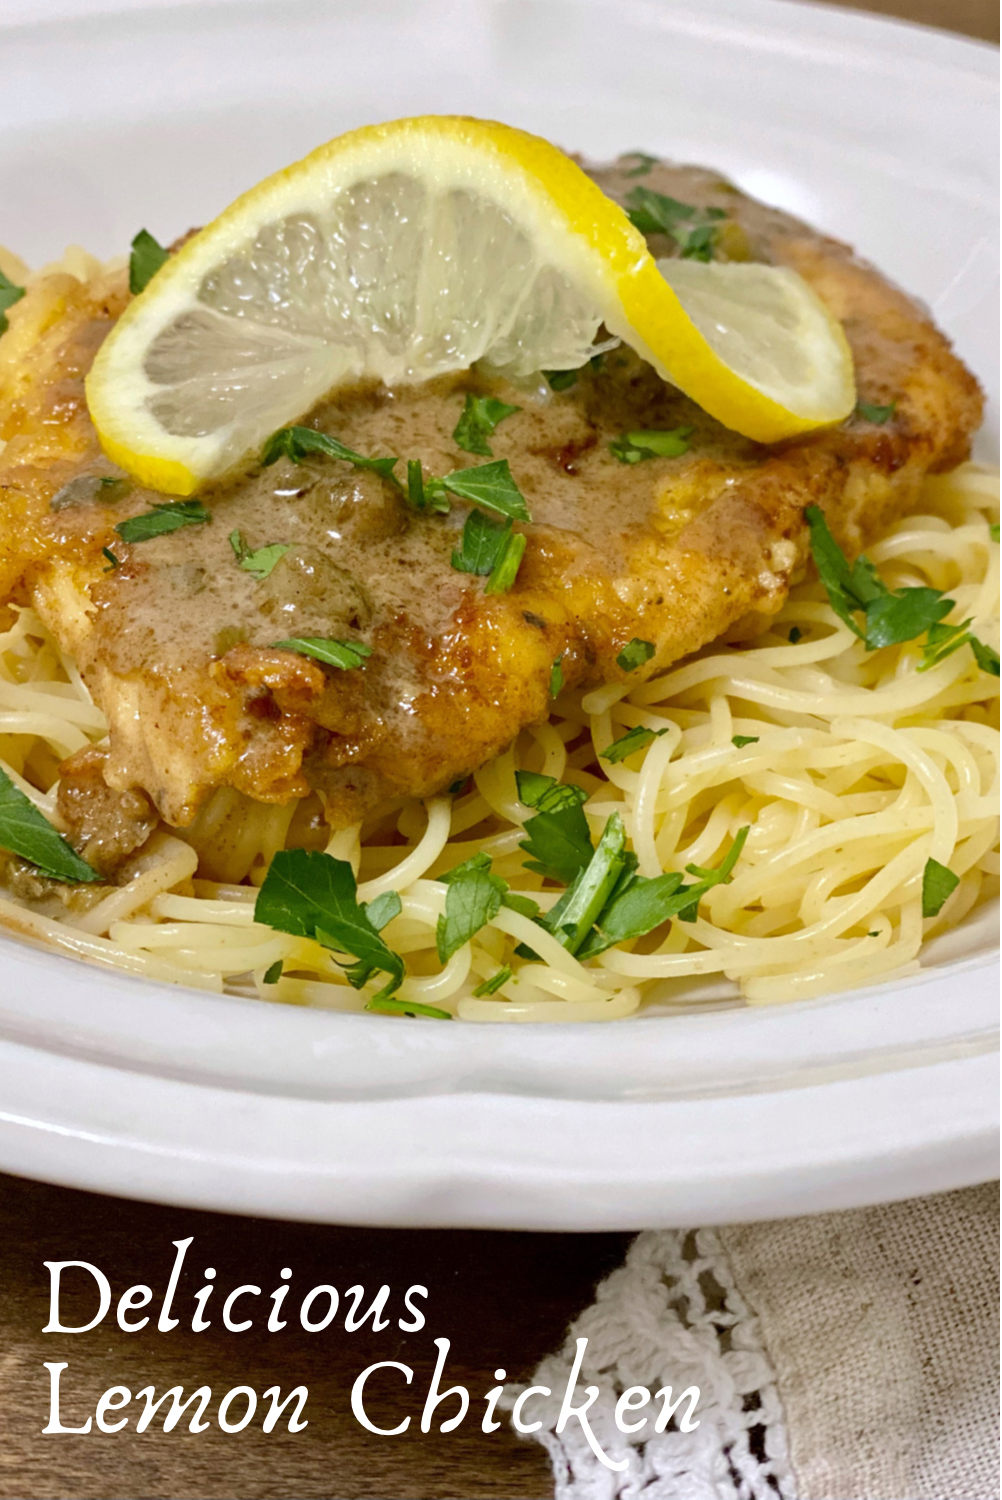 Lemon Chicken with capers on a bed of angel hair pasta garnished with parsley and a lemon wedge.